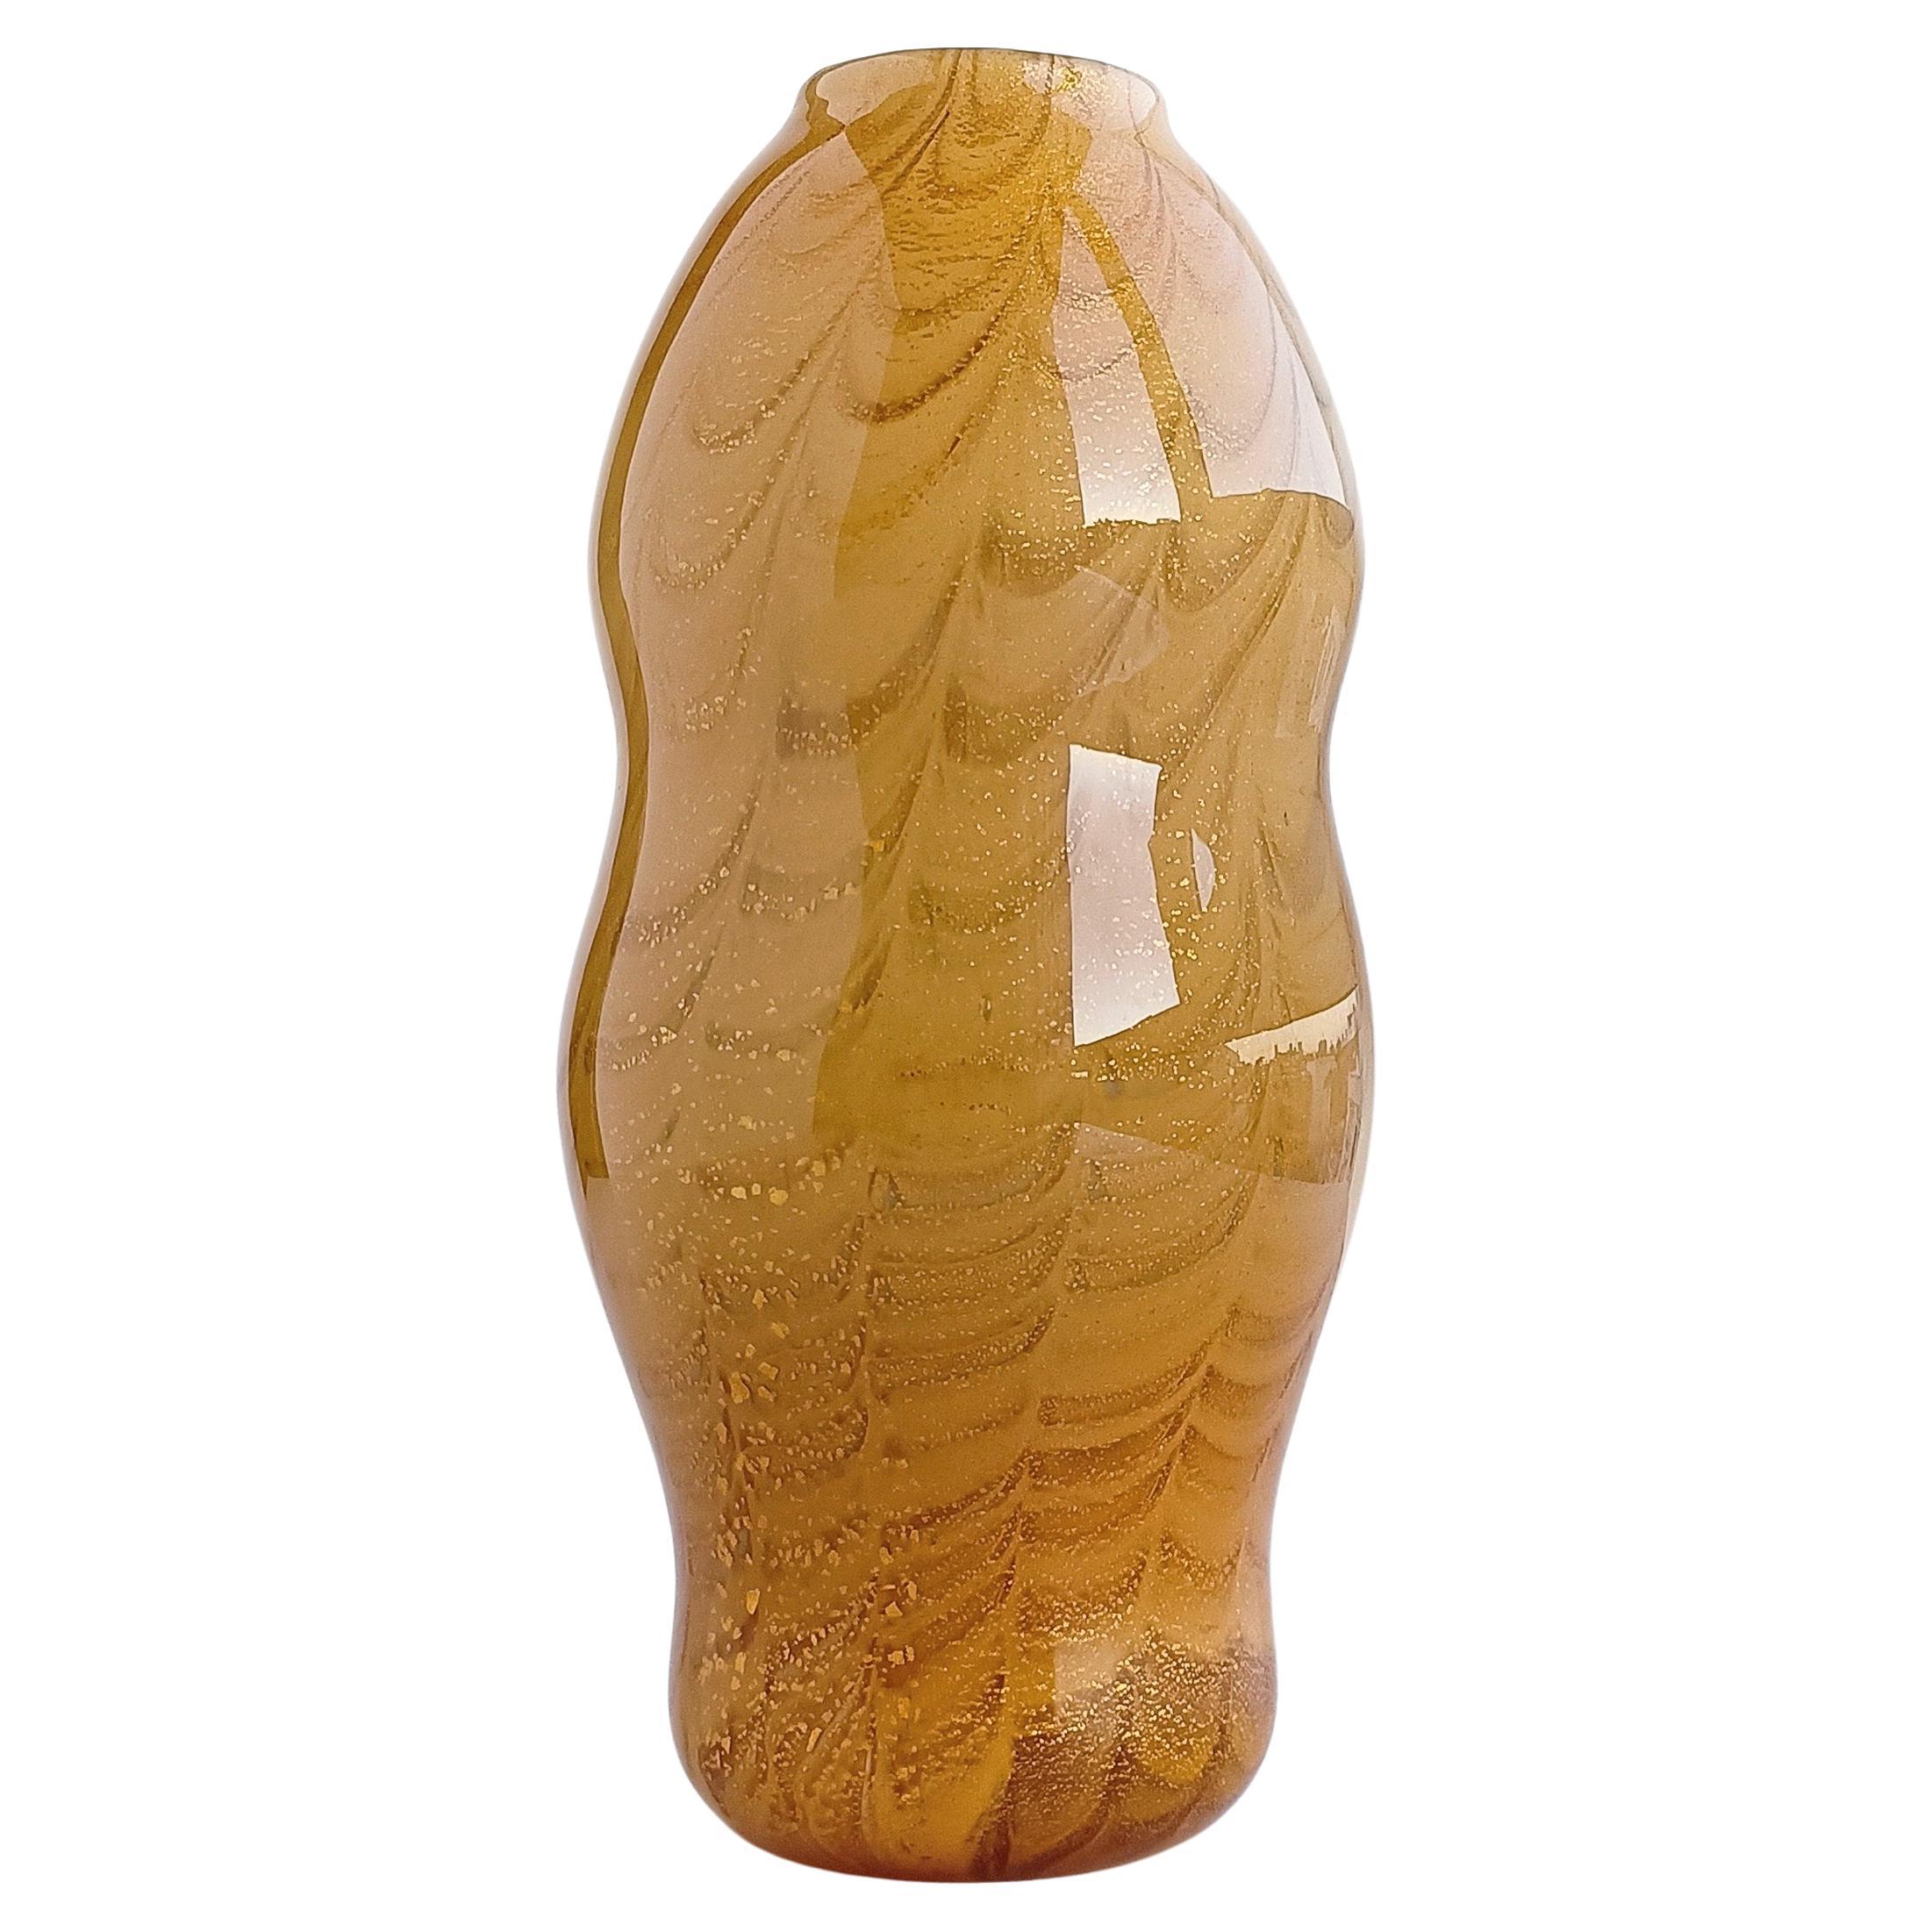 Late 20th Century Vintage Italian Art Deco Signed Murano Glass Vase With Gold Flecks For Sale